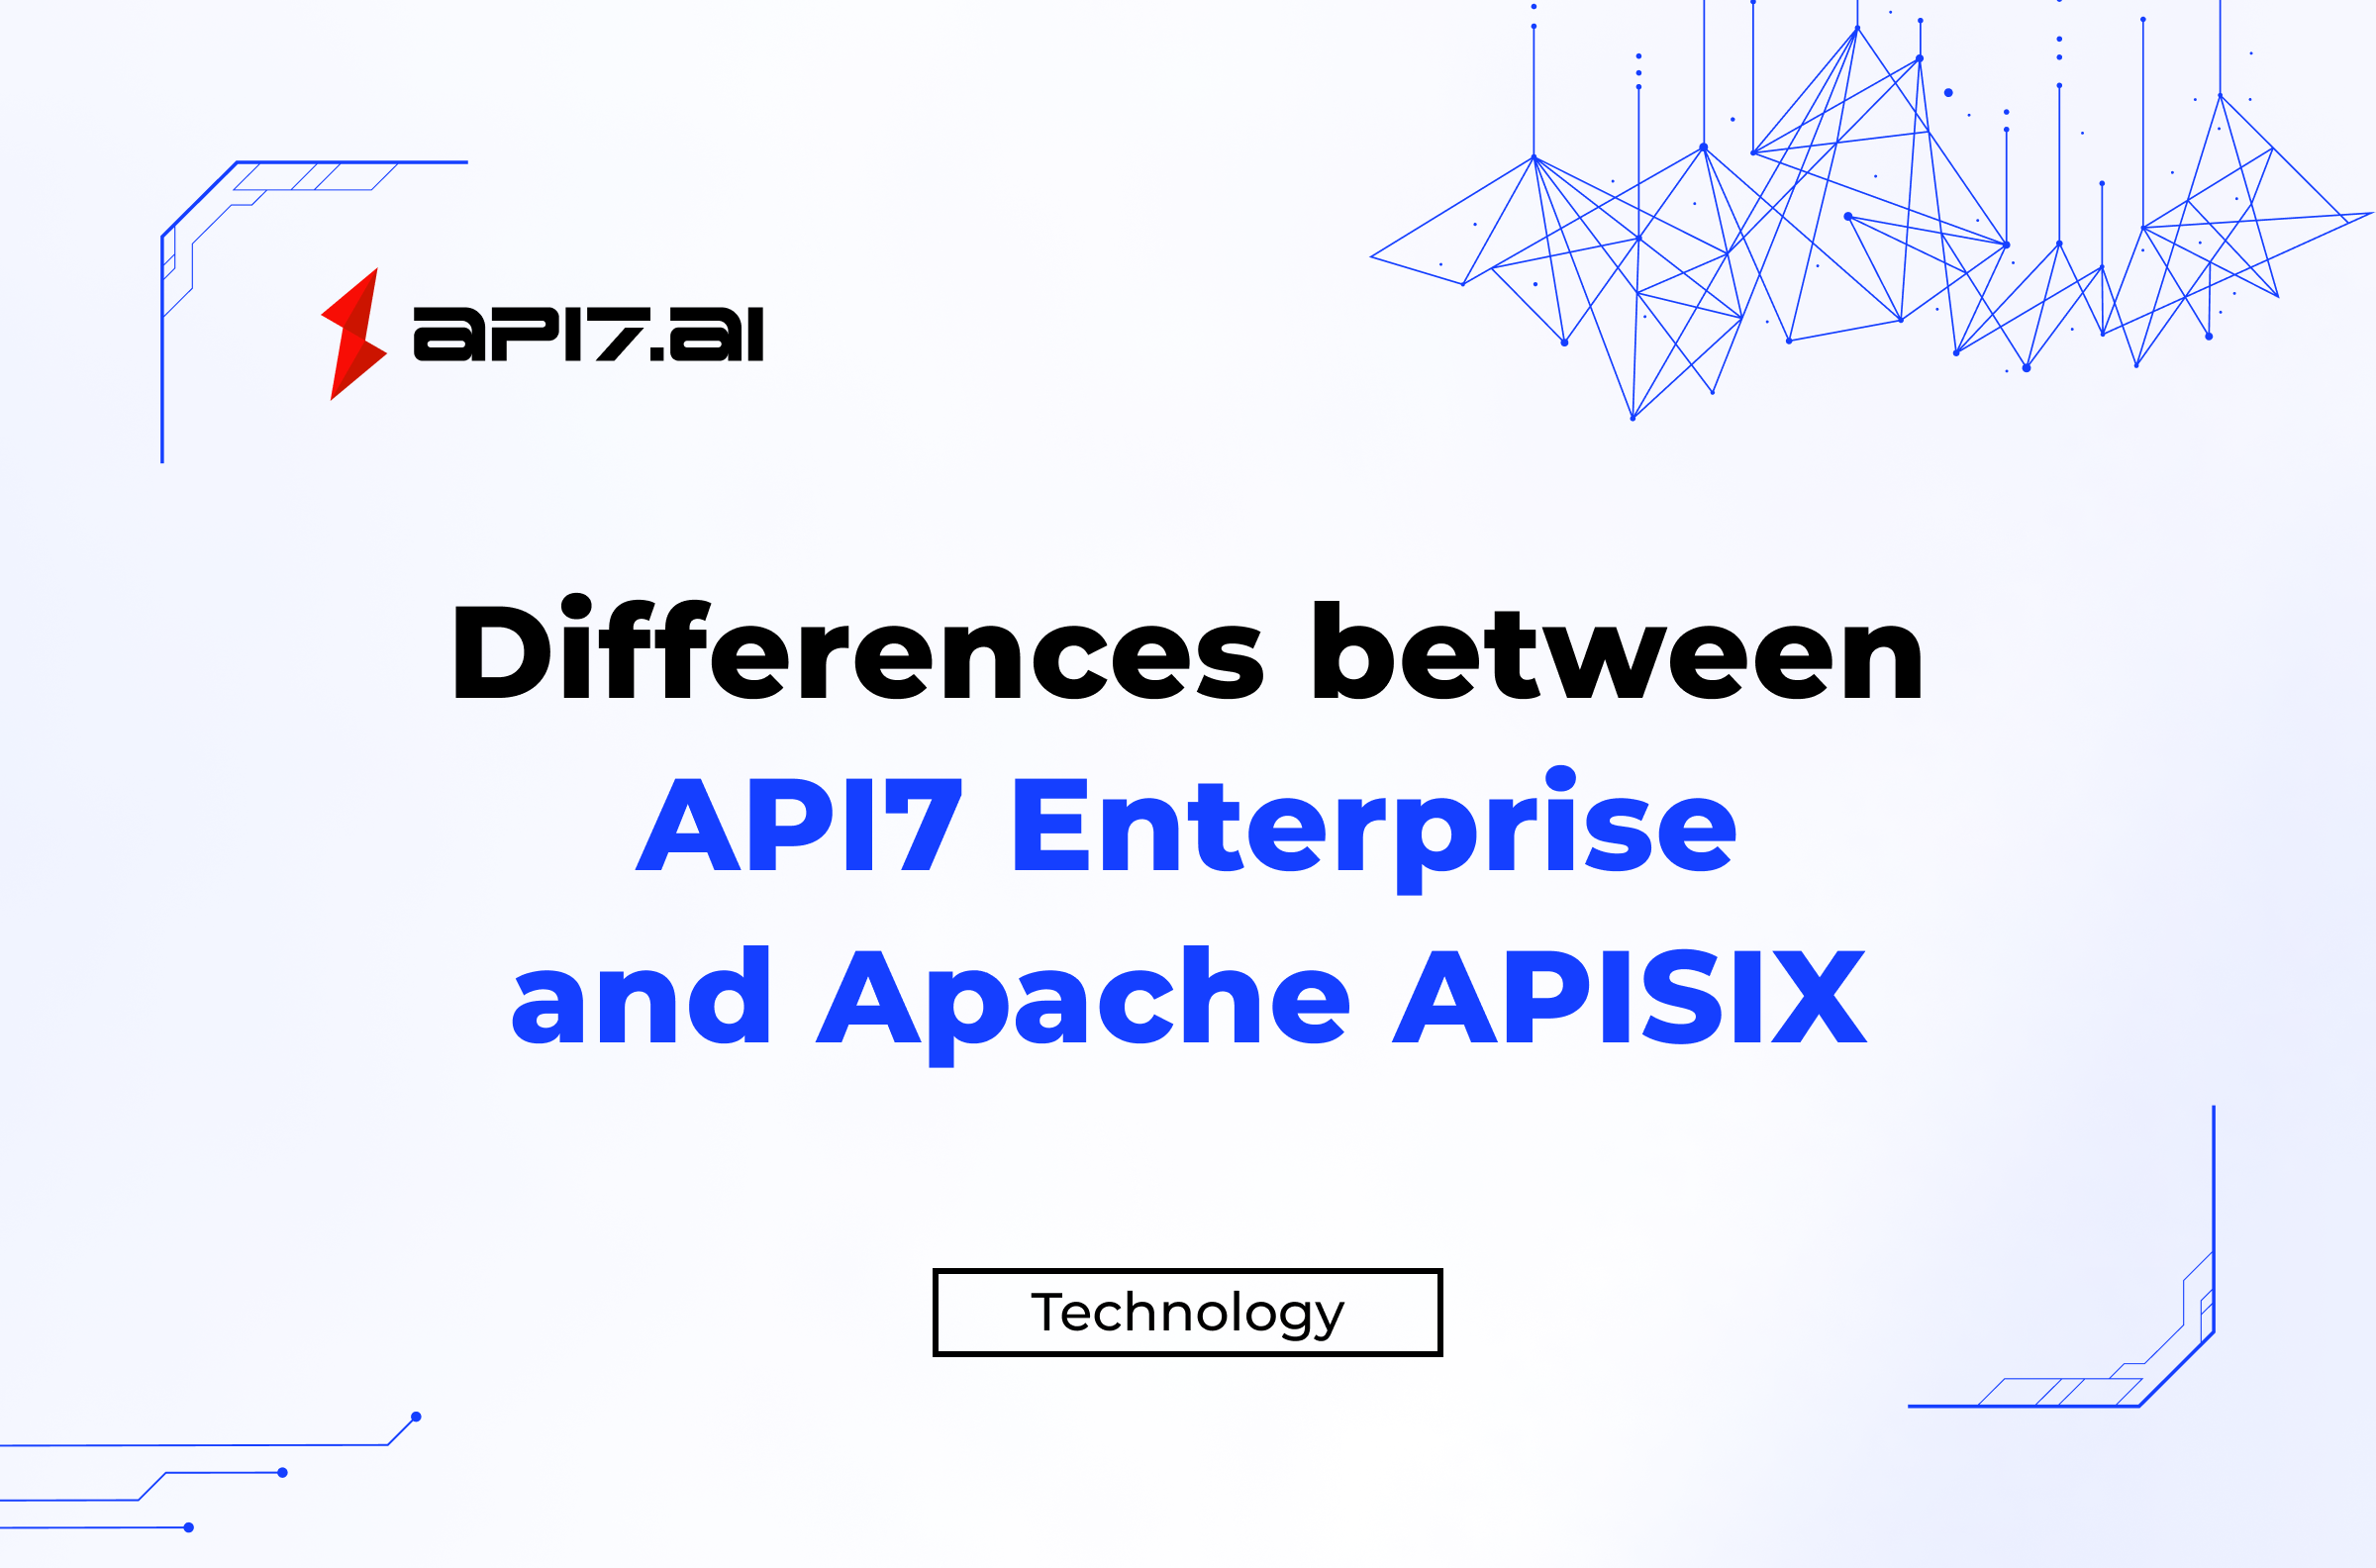 Differences between API7 Enterprise and Apache APISIX